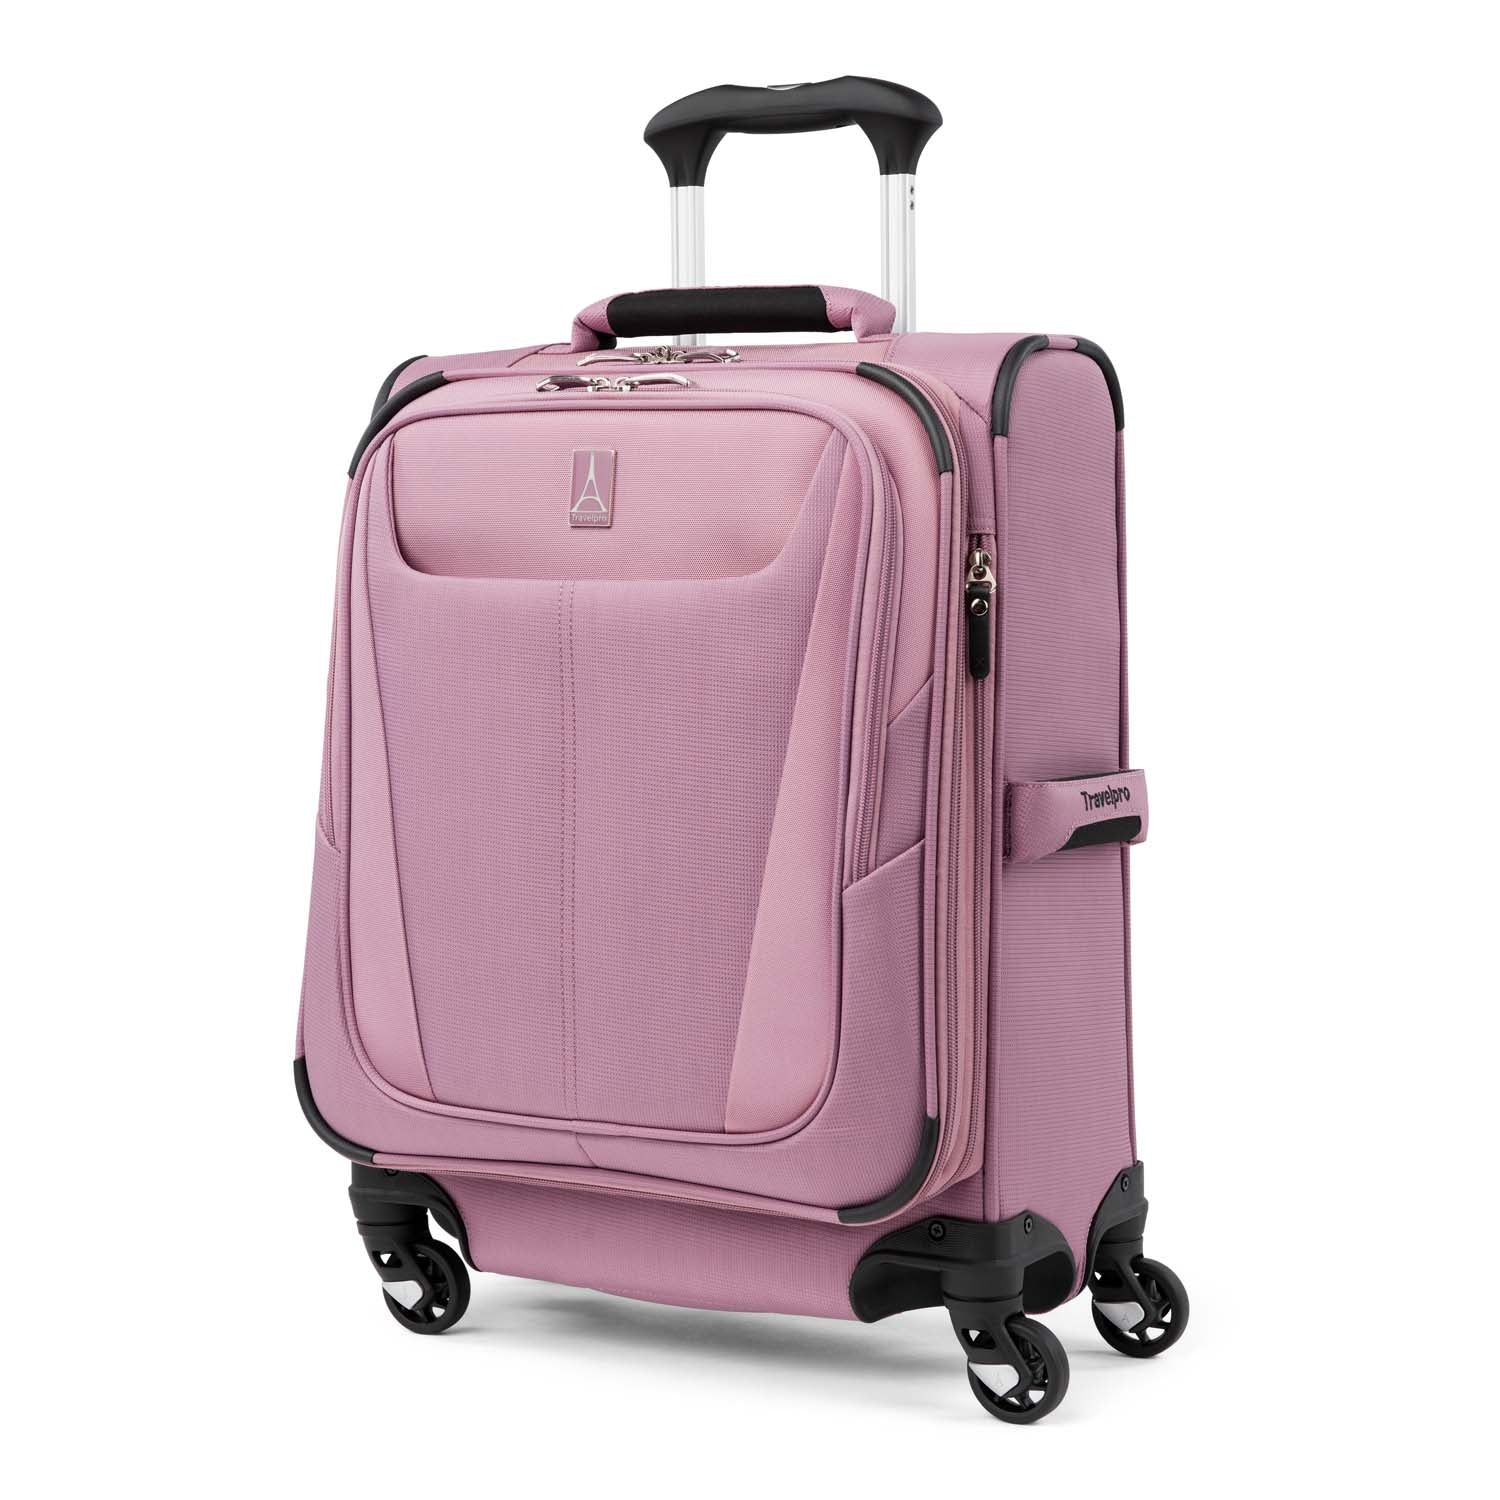 Travelpro Maxlite 5 International Carry-On Spinner Luggage - Orchid